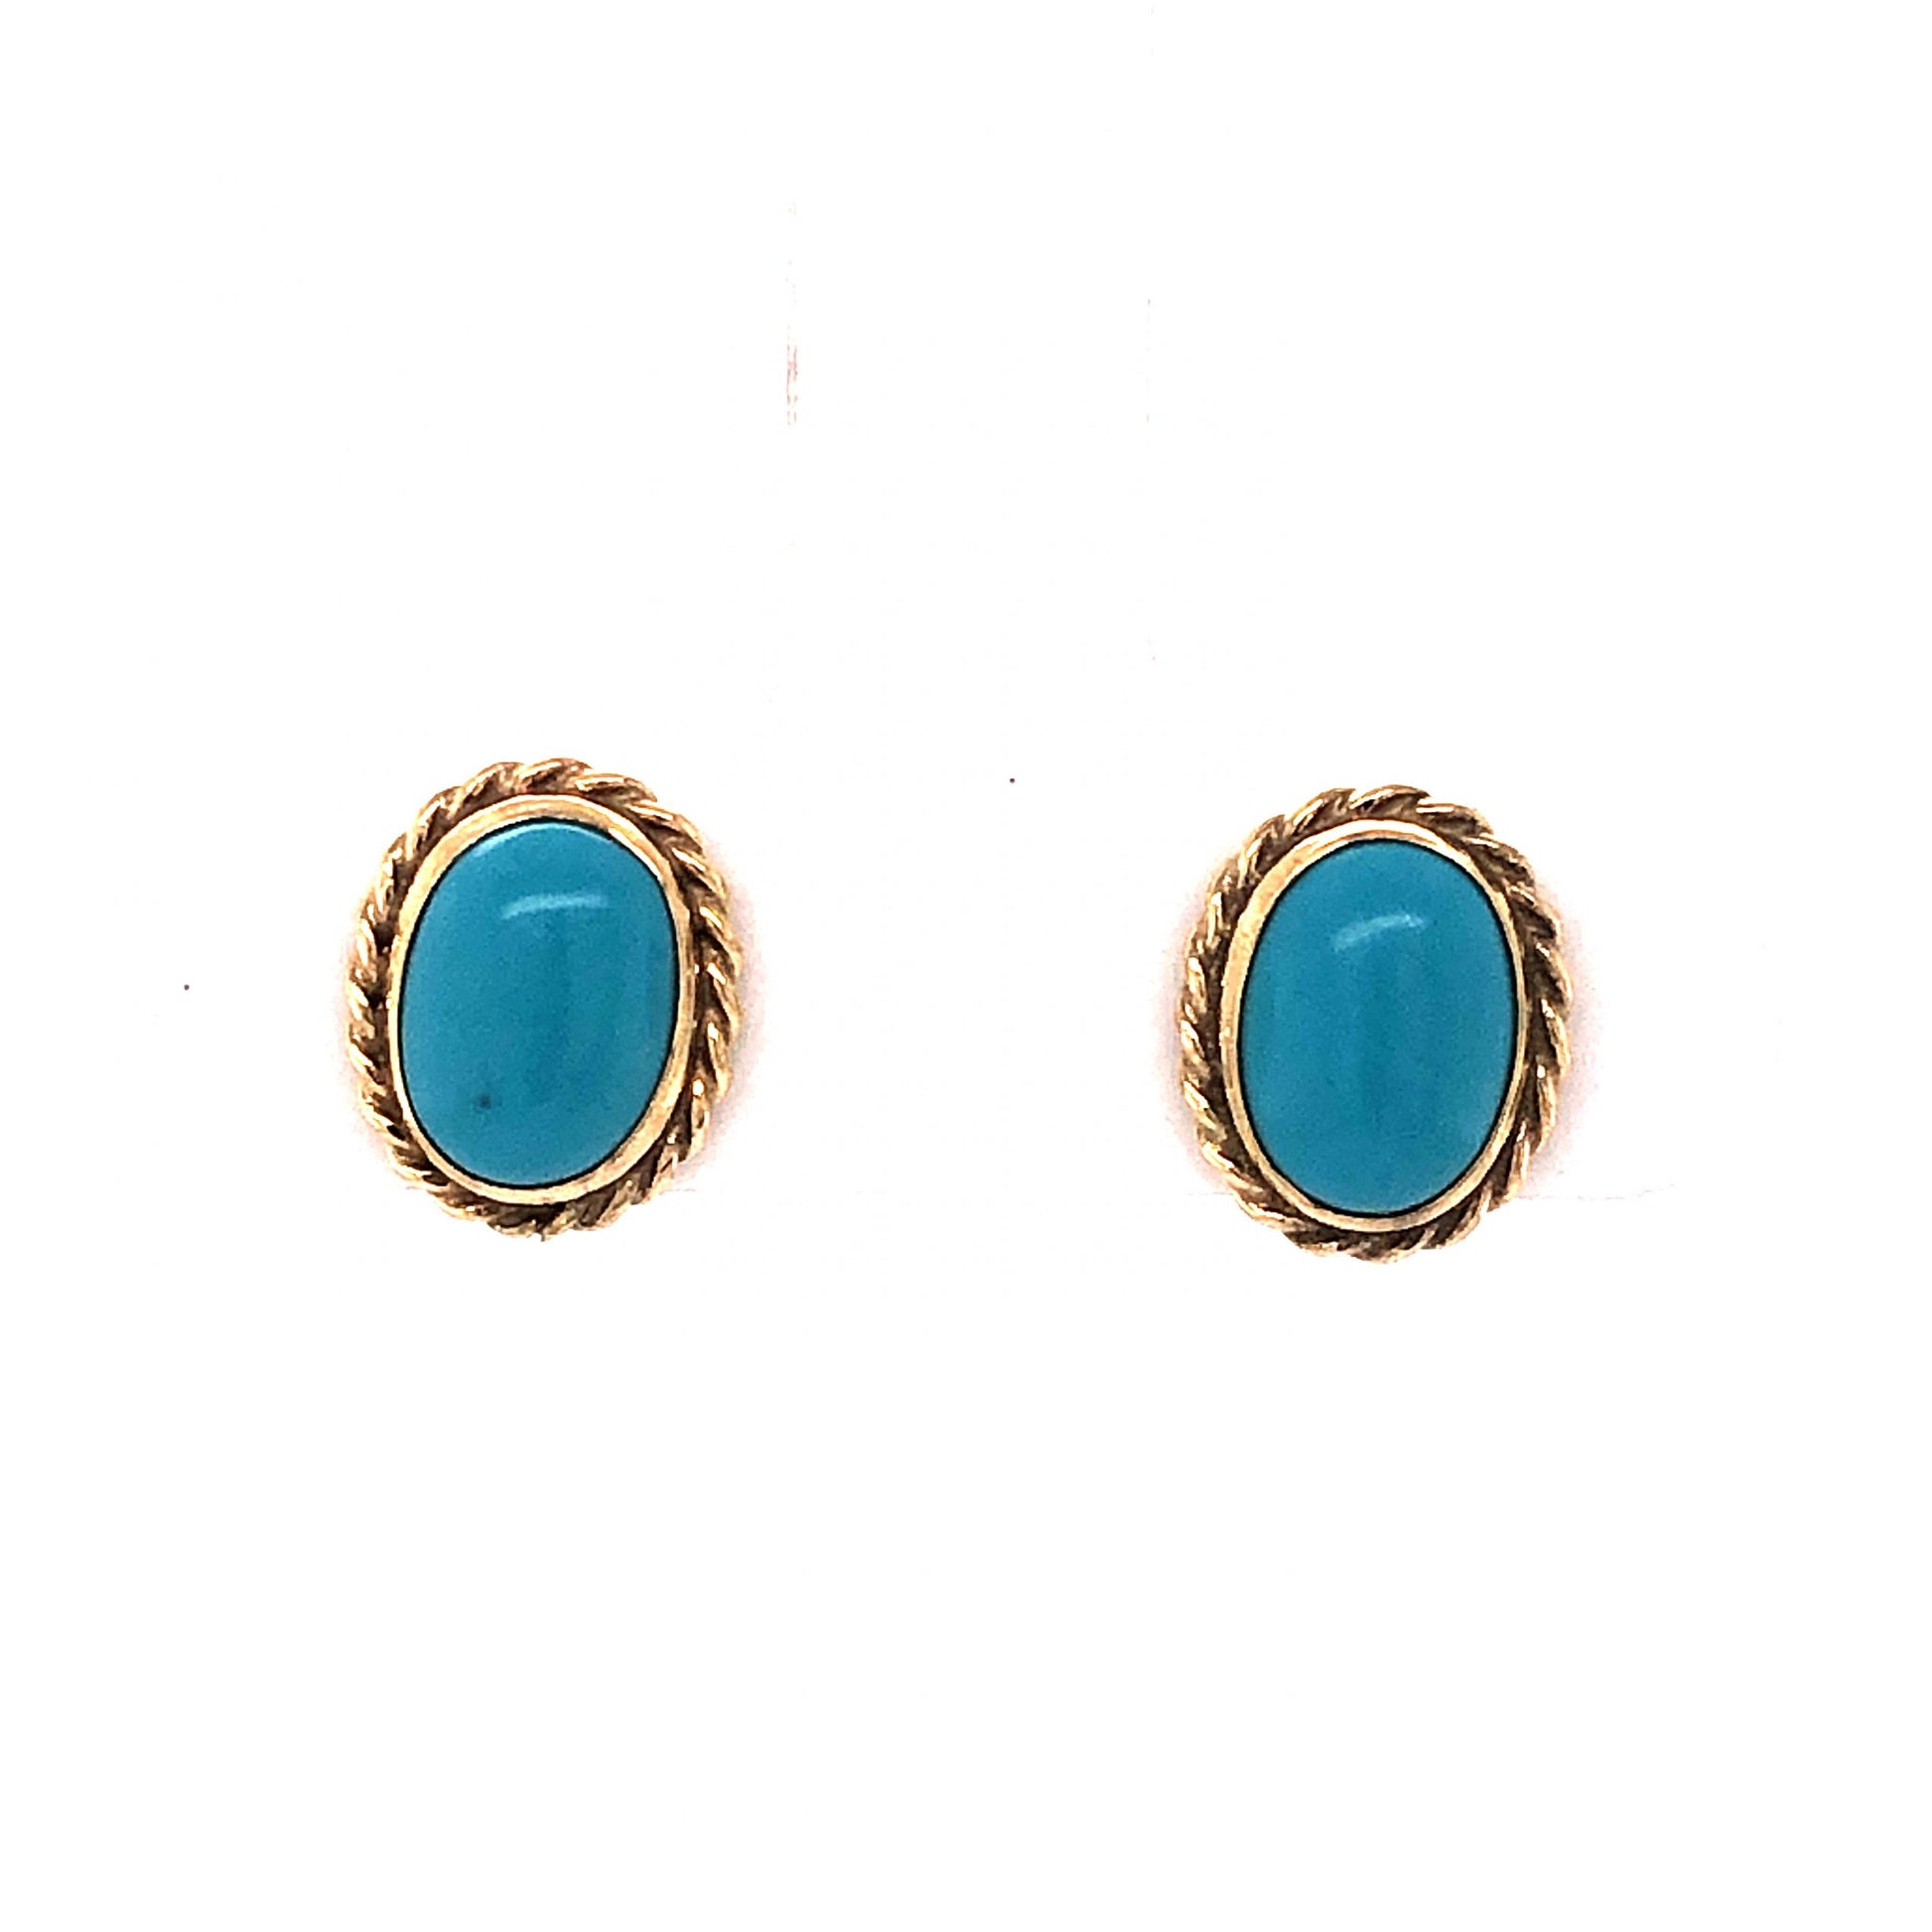 Everyday Turquoise Stud Earrings in 14k Yellow Gold